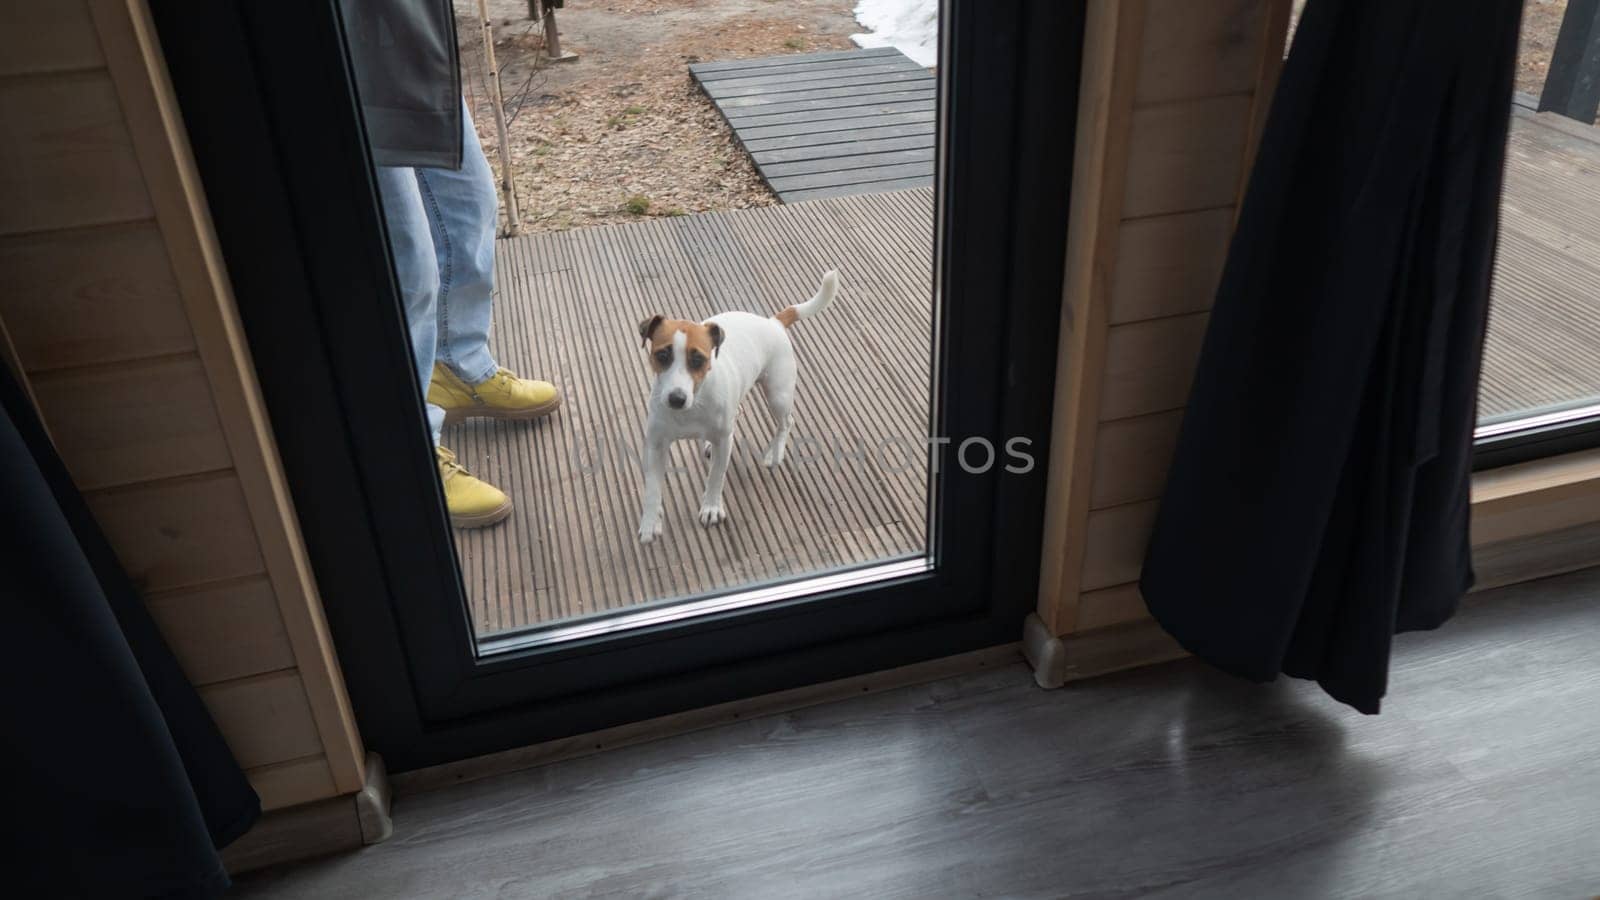 The dog stands at the patio window and asks to go inside the house. by mrwed54